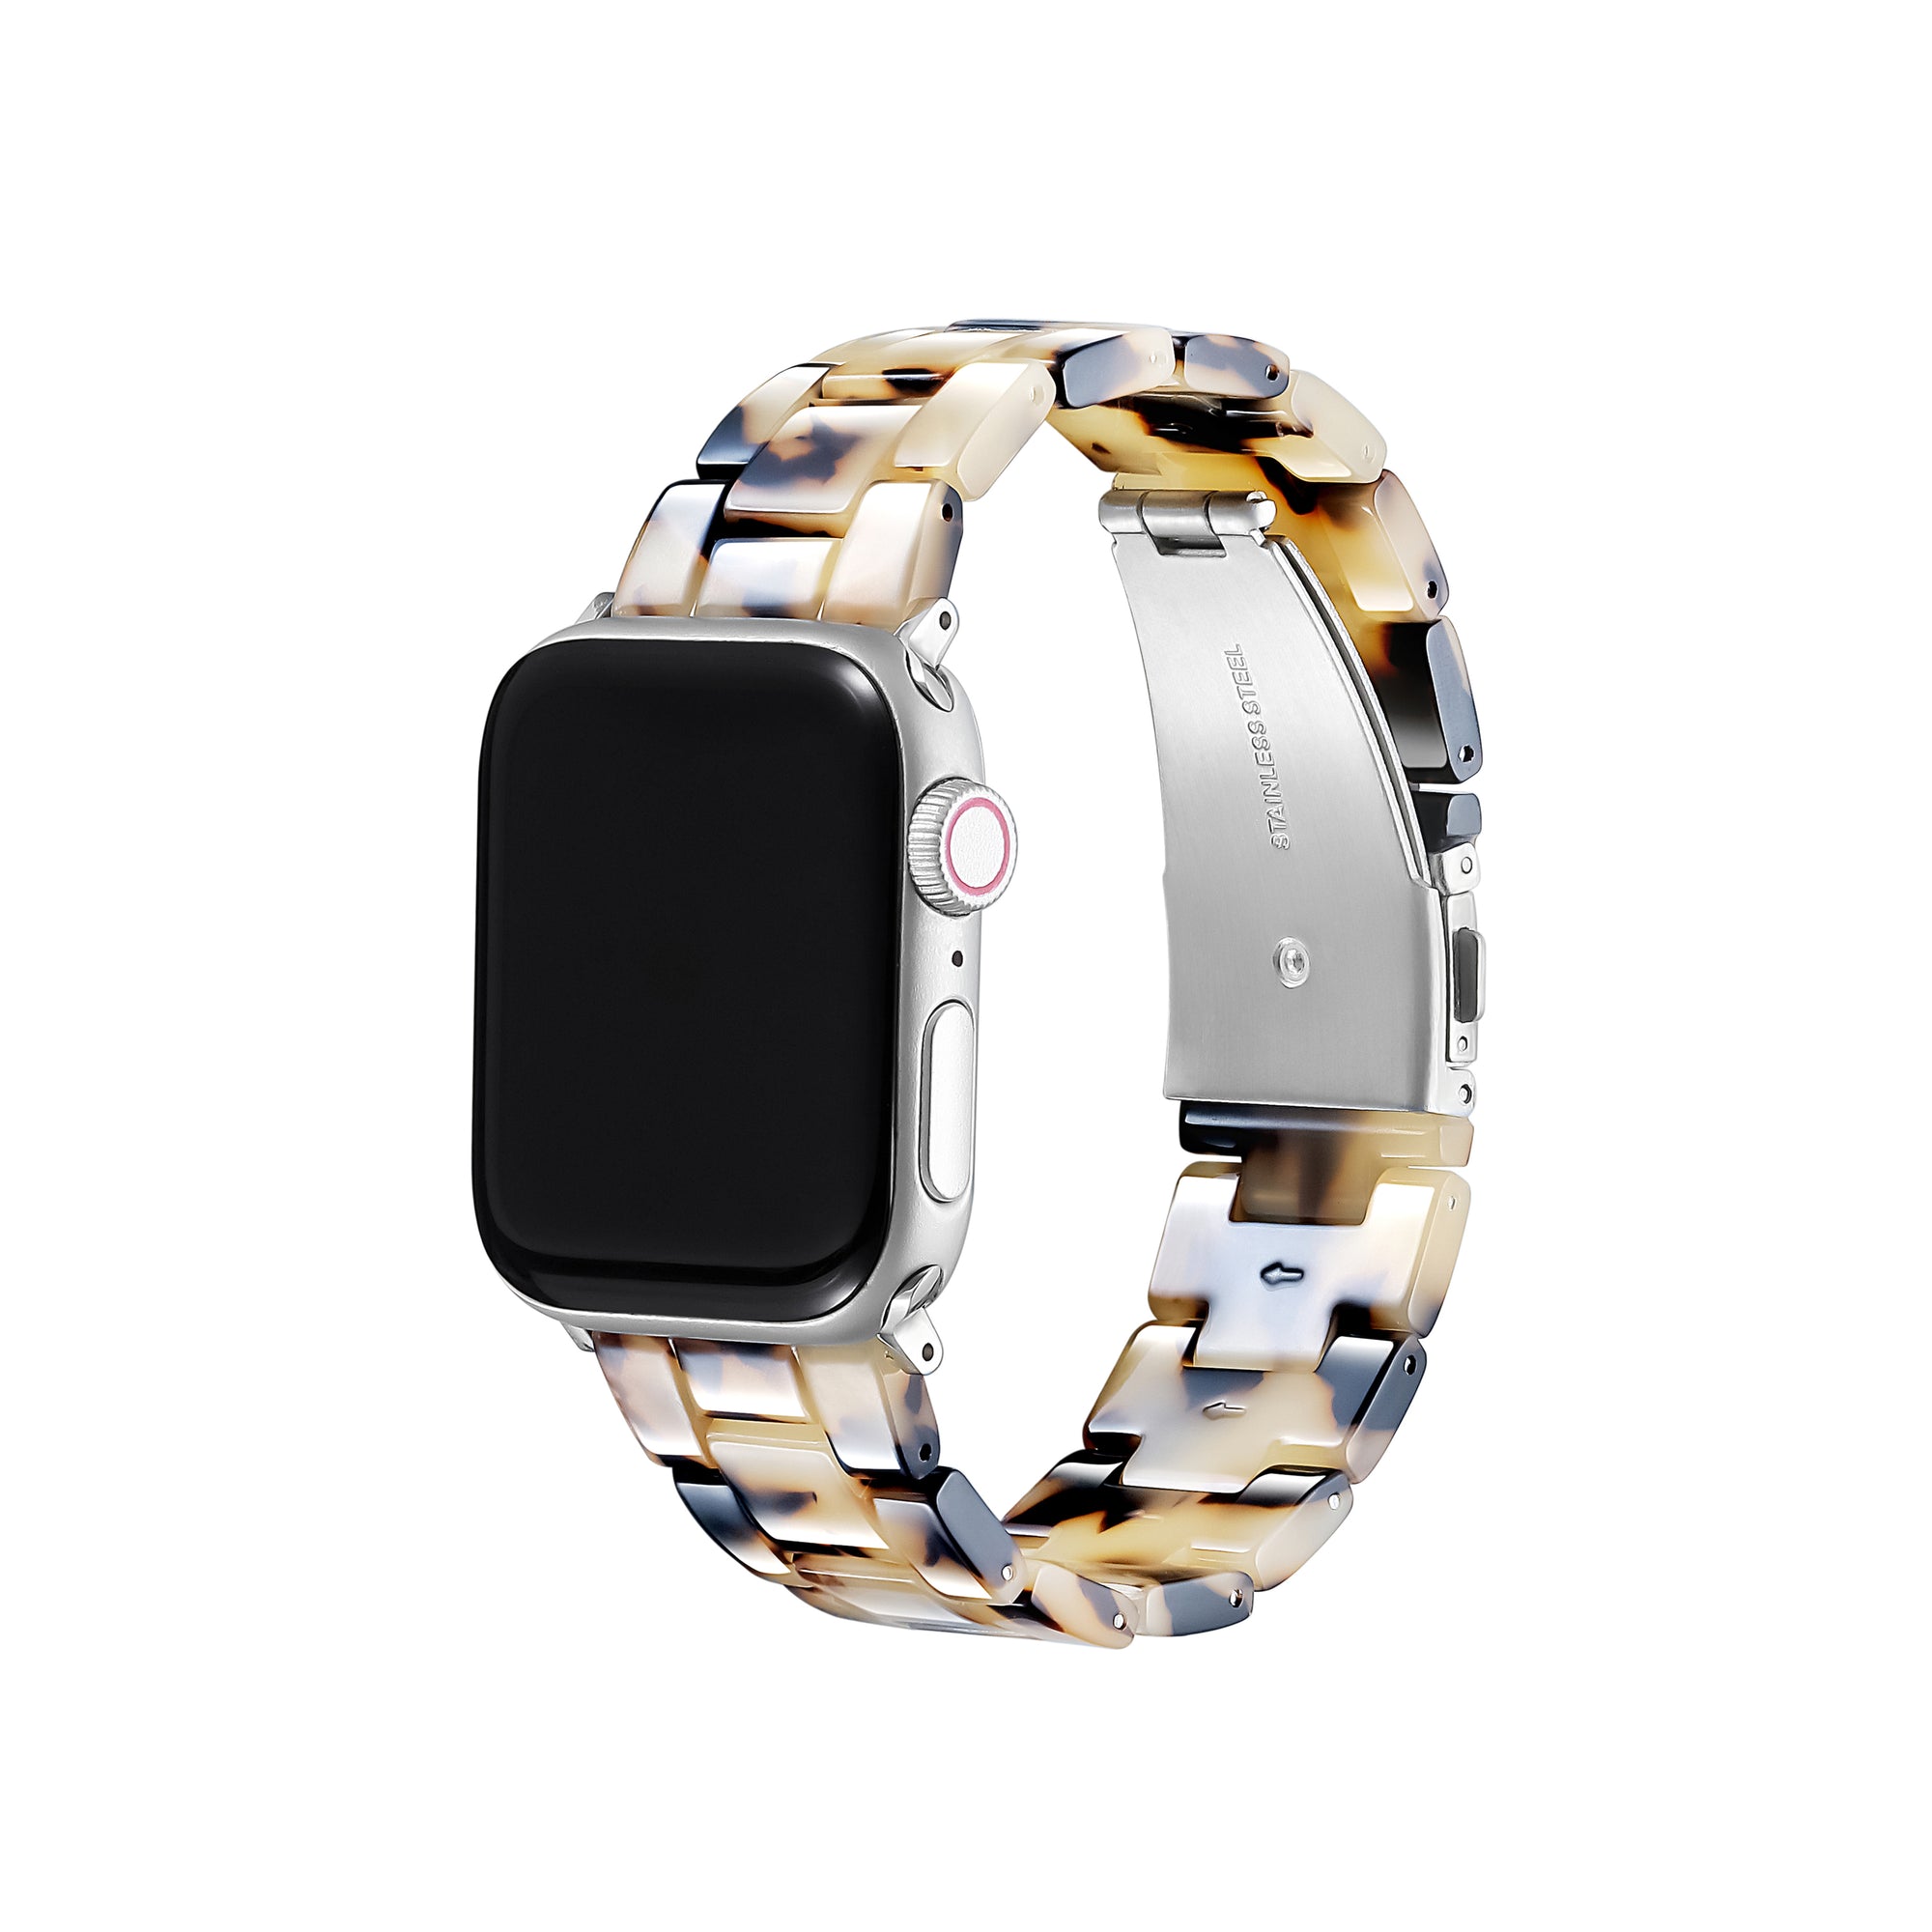 Claire Tortoise Resin Replacement Band for Apple Watch - Classic Colors